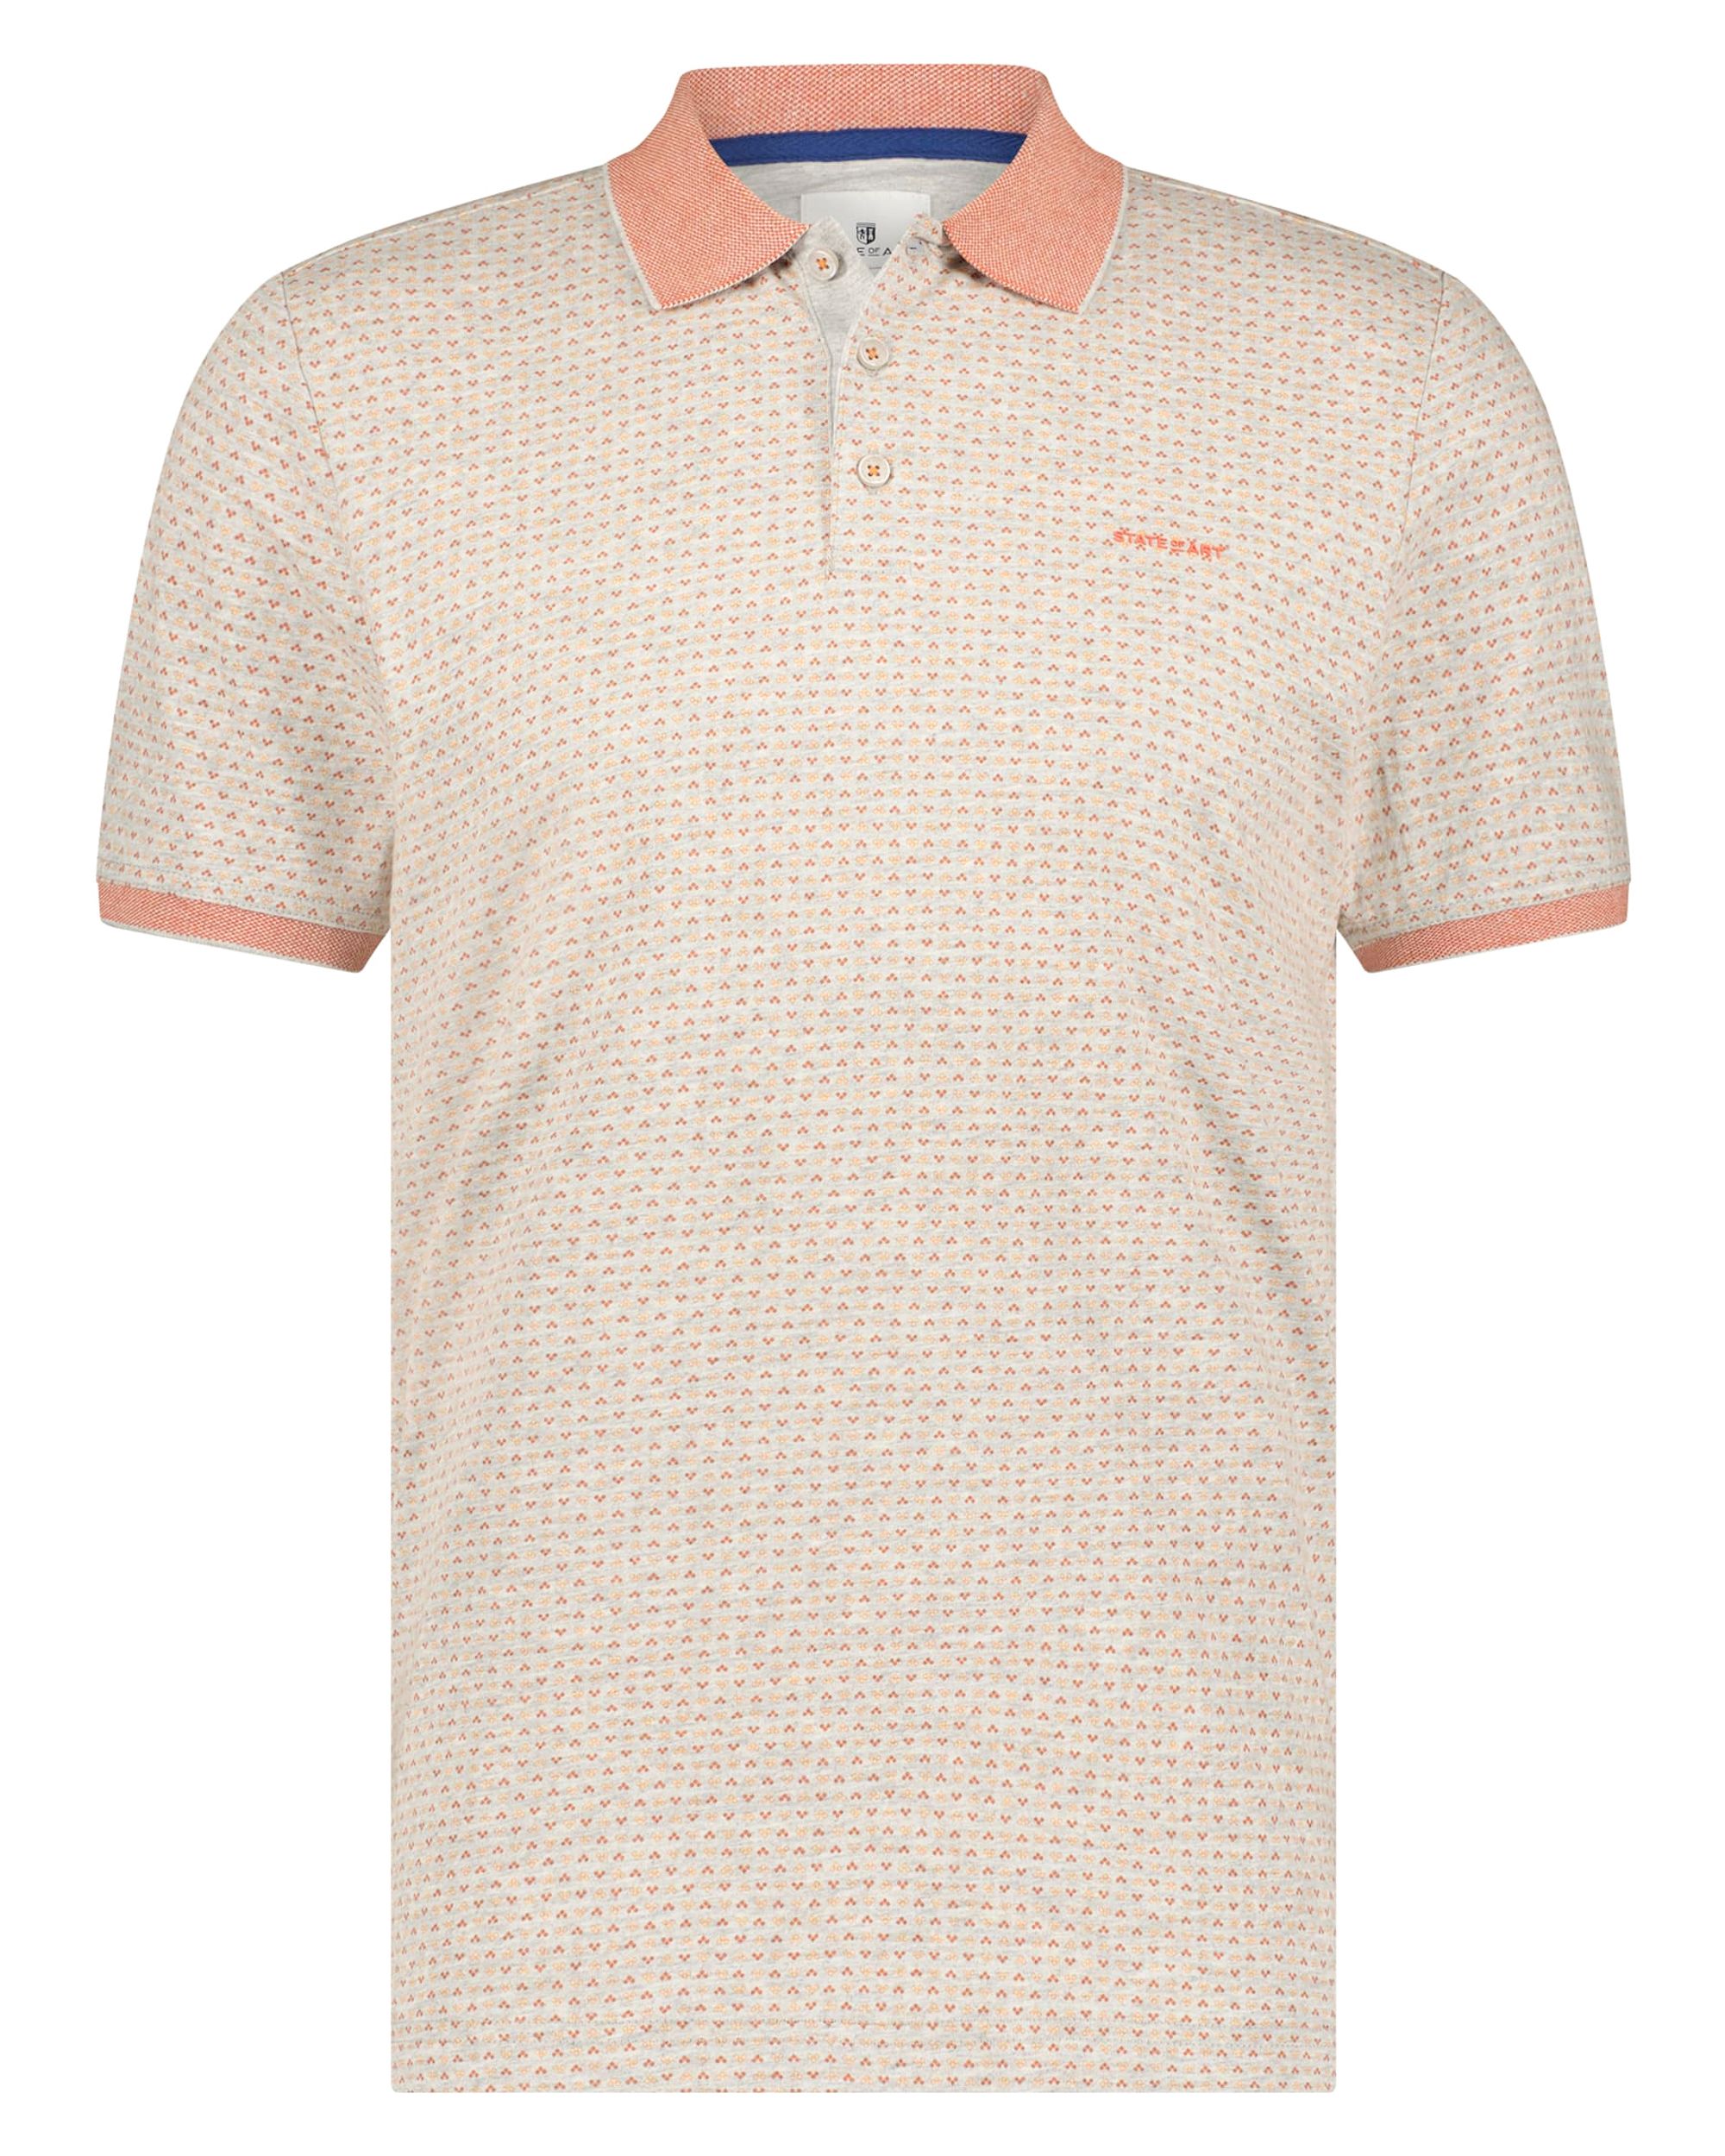 State of Art Polo KM Beige 077881-001-4XL